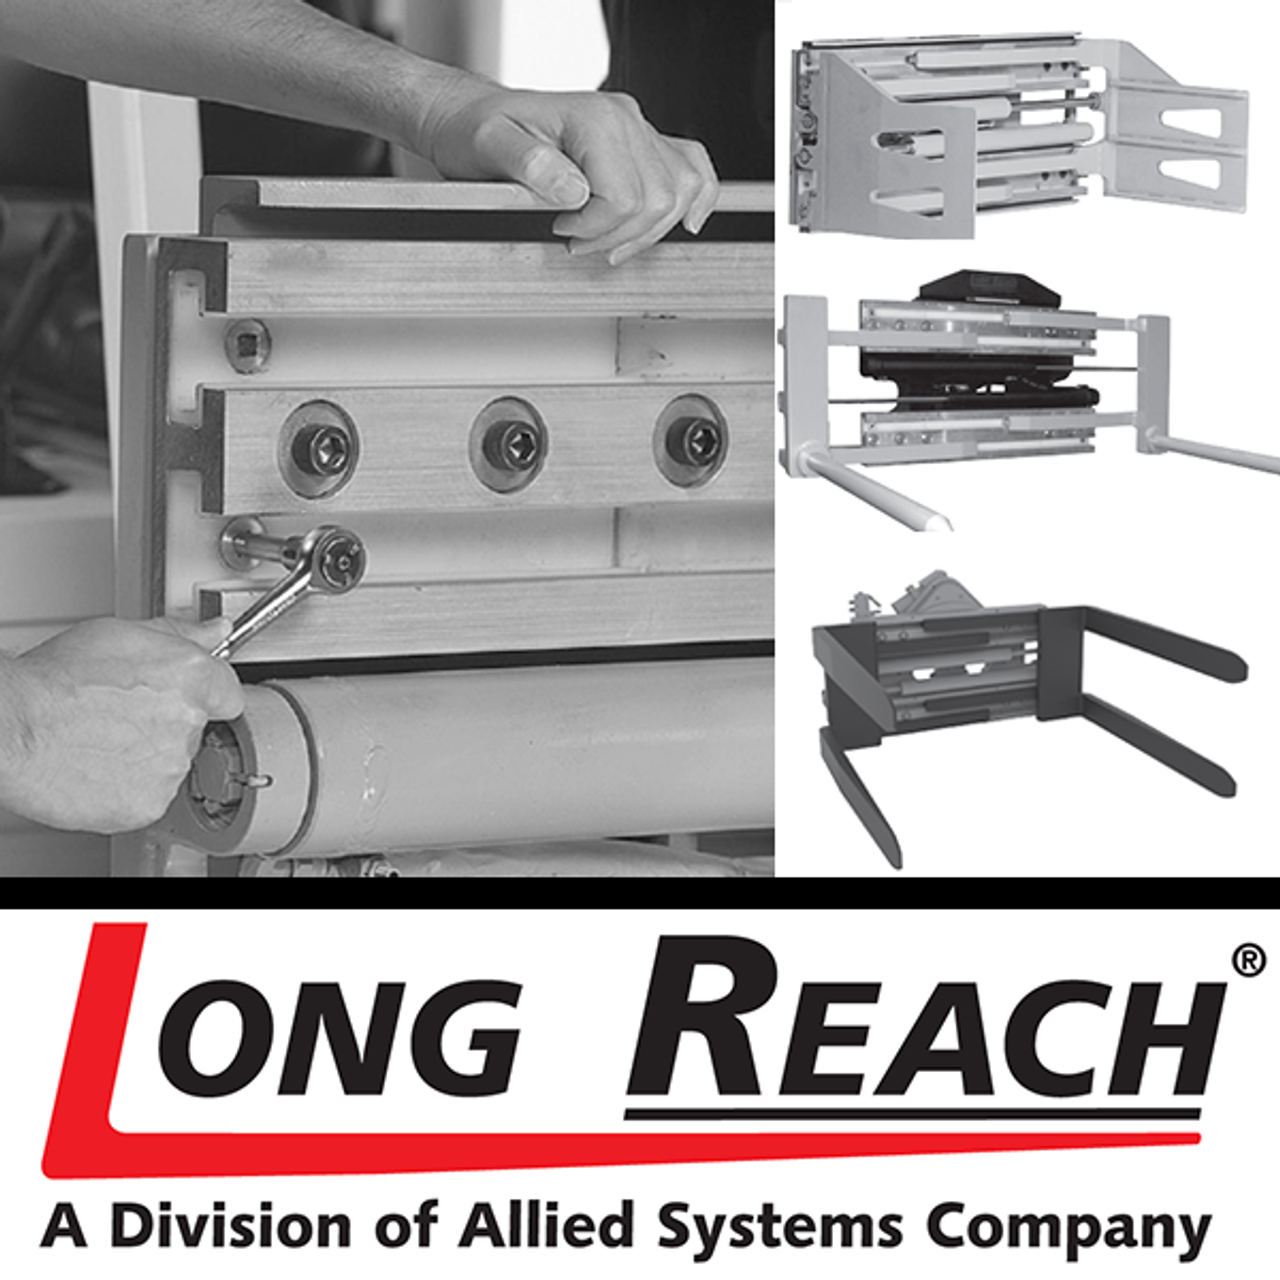 2521825: Long Reach Contact Pad (Service Use Only) Kit